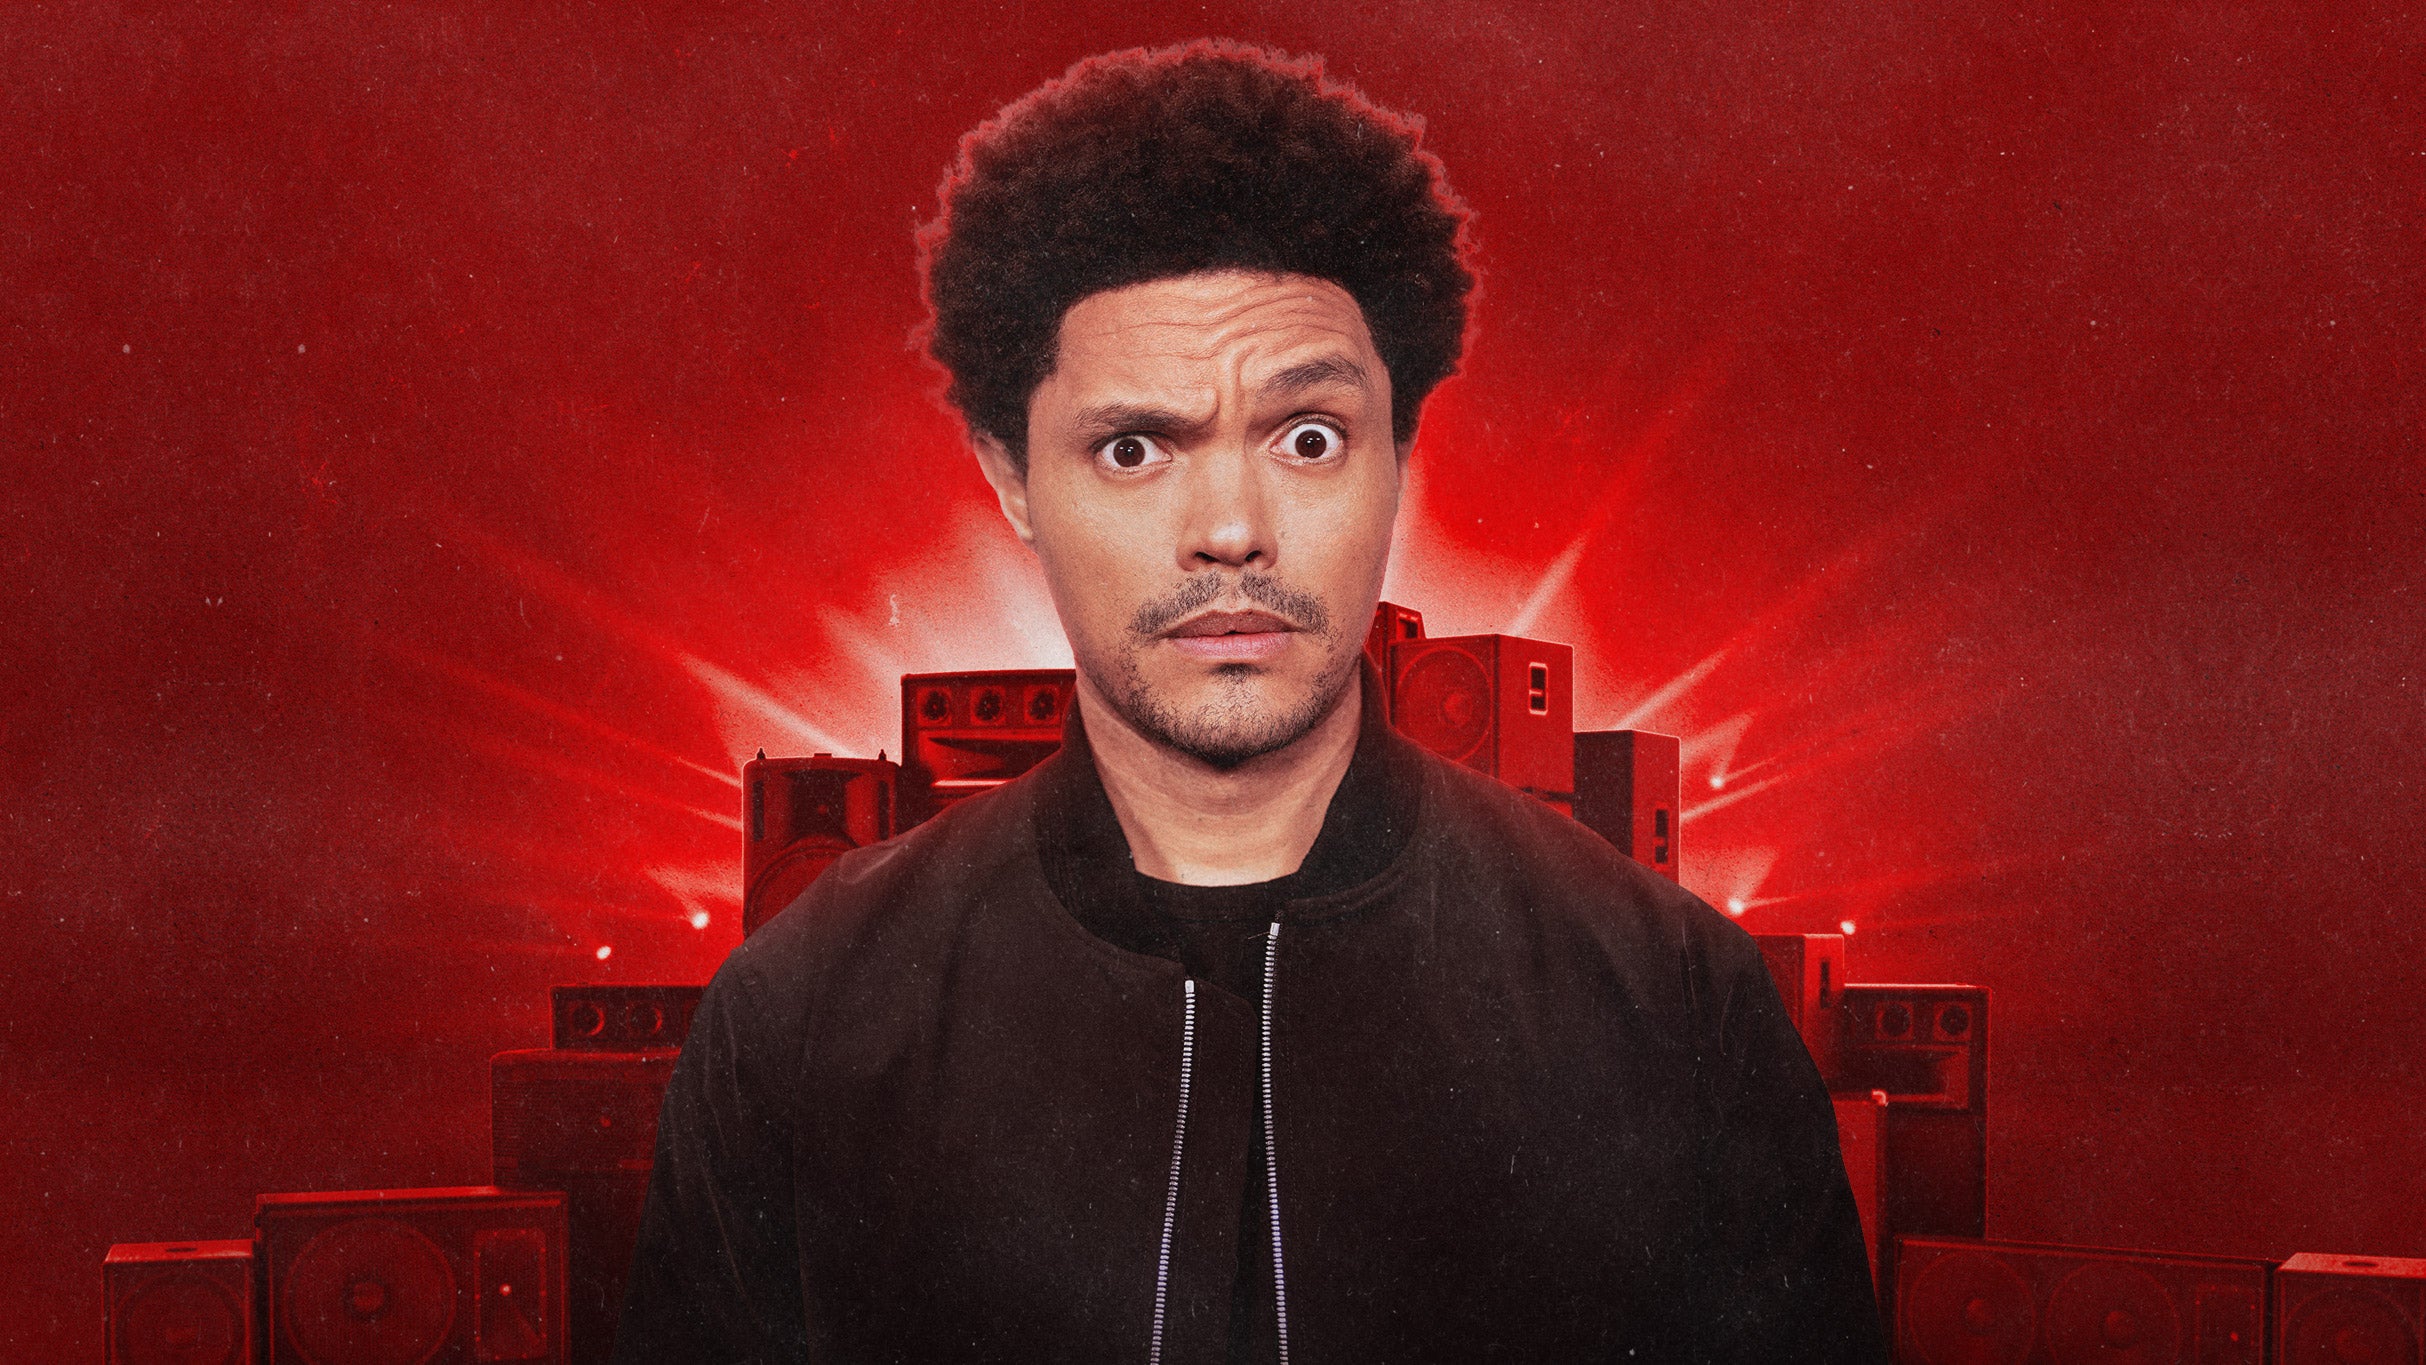 Trevor Noah: Off The Record free pre-sale password for early tickets in Newark